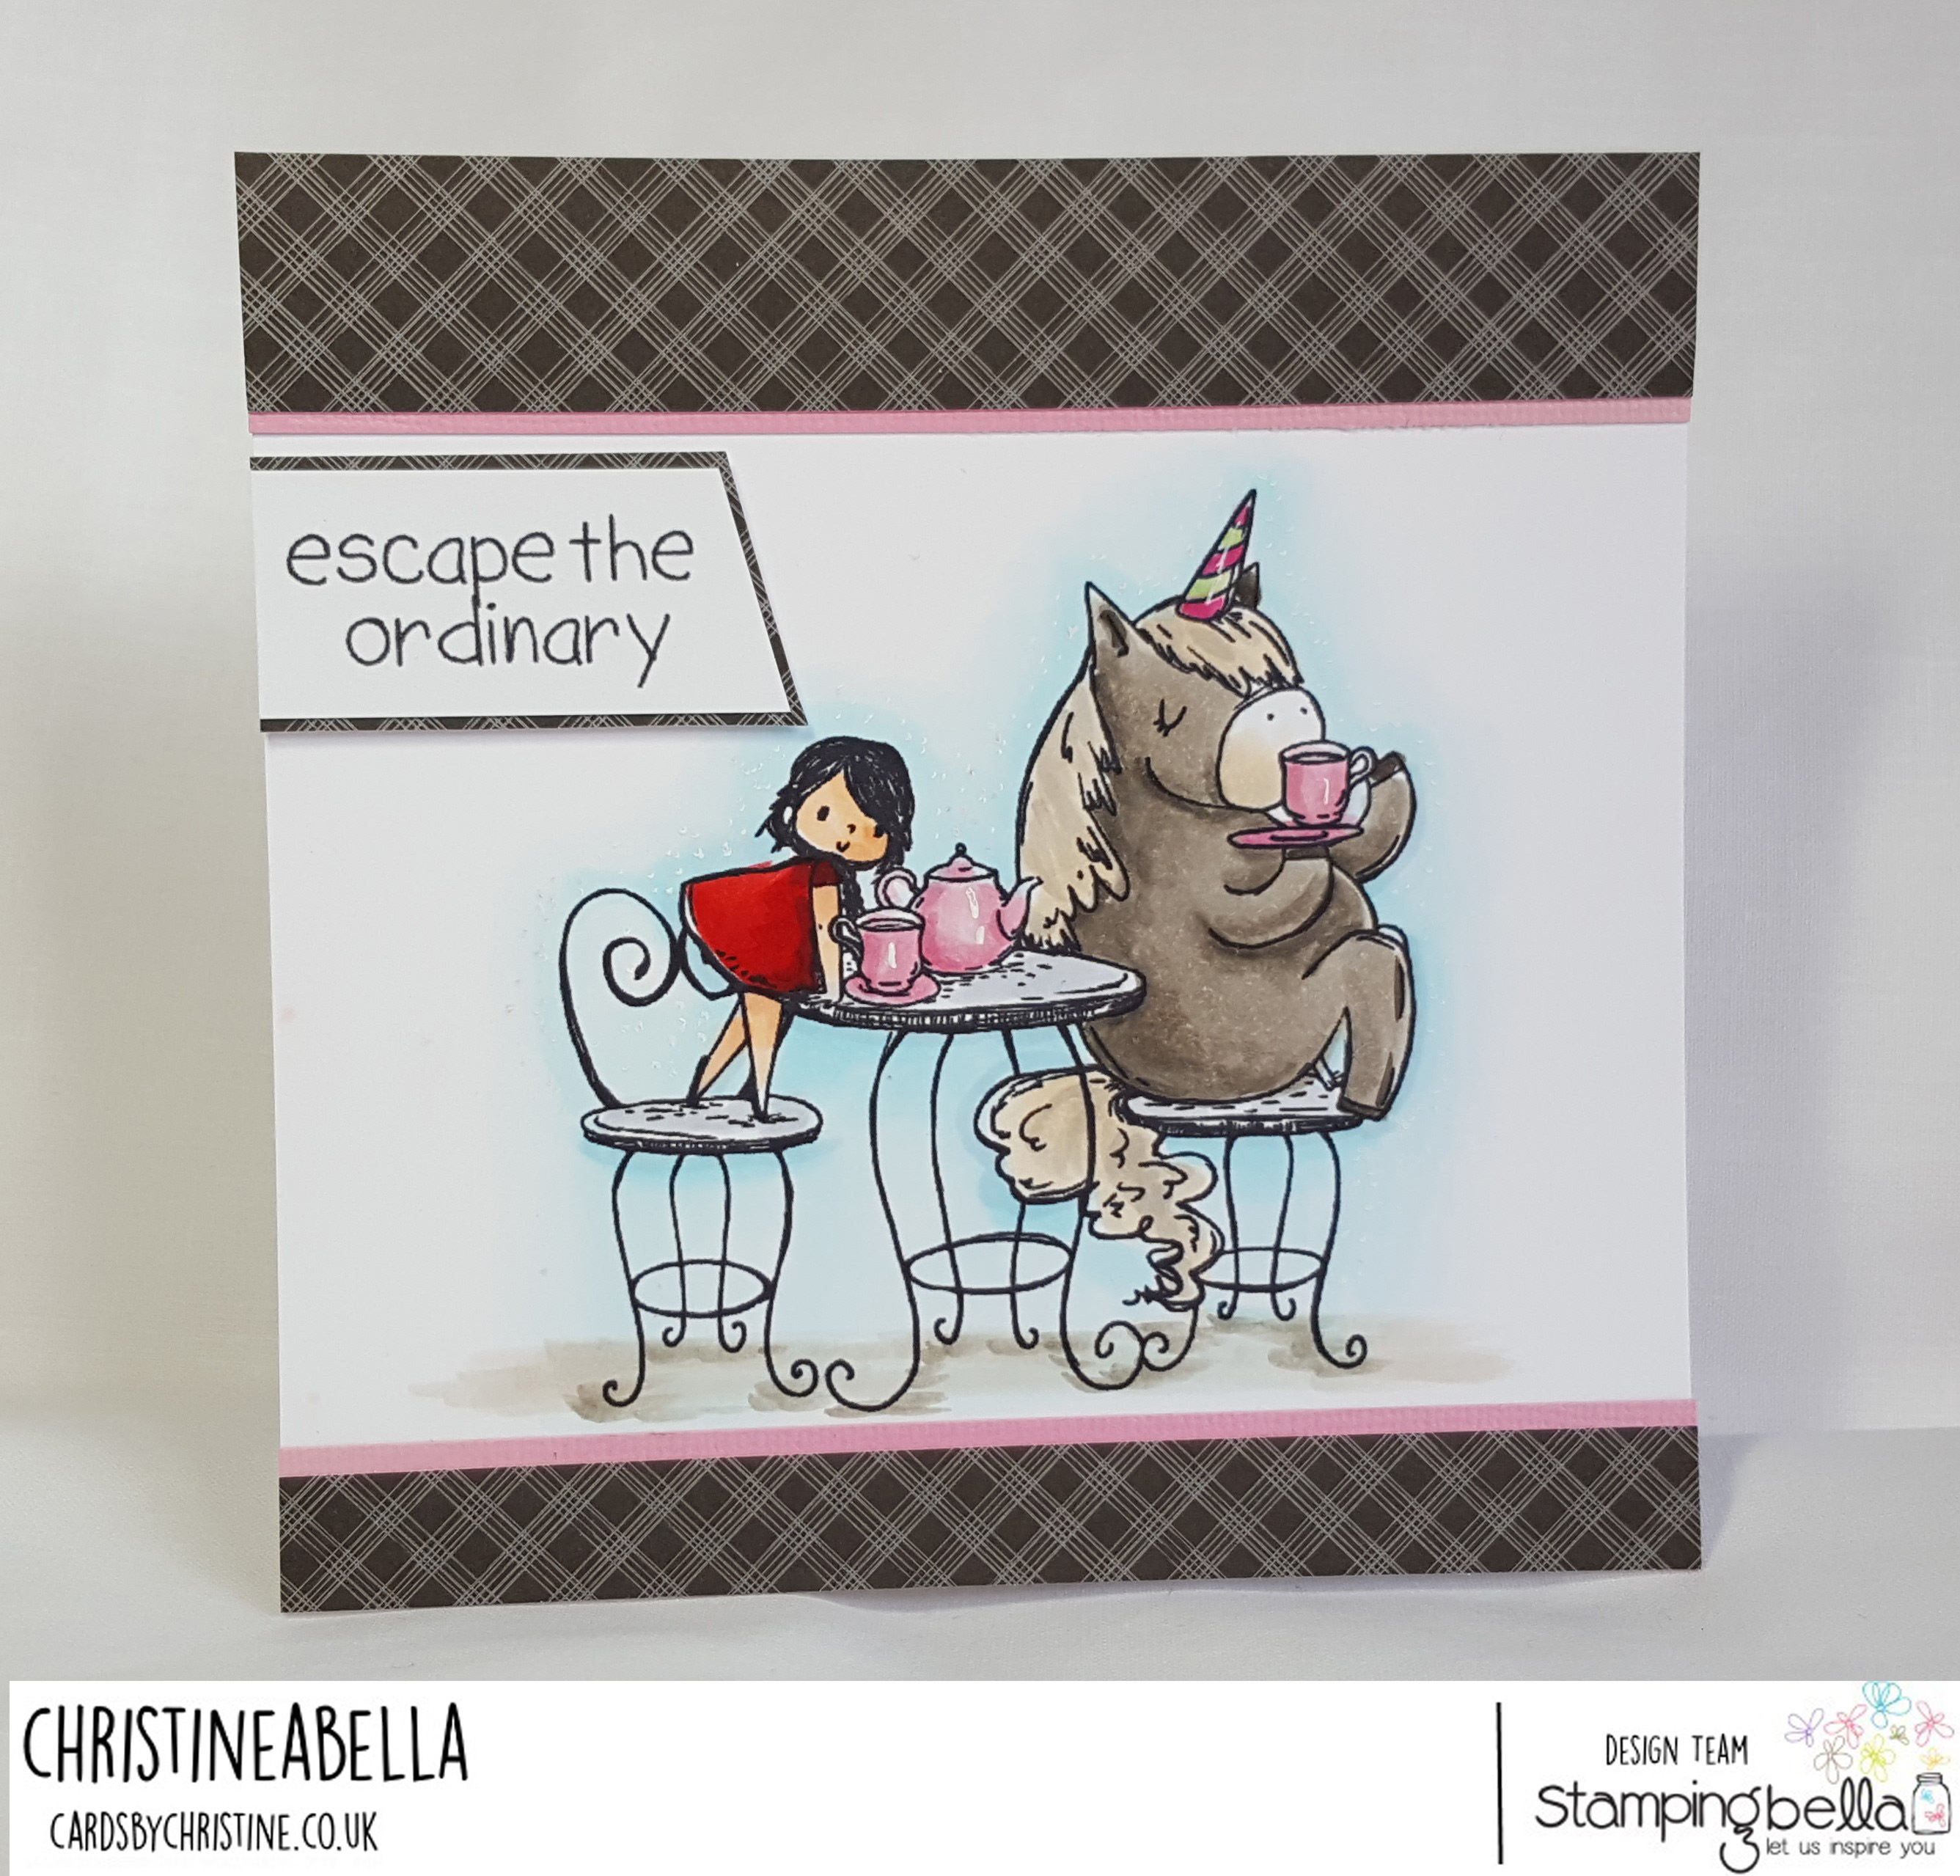 www.stampingbella.com: Rubber stamps used: Rosie and Bernie have a TEA PARTY, Adventure sentiment set card by Christine Levison